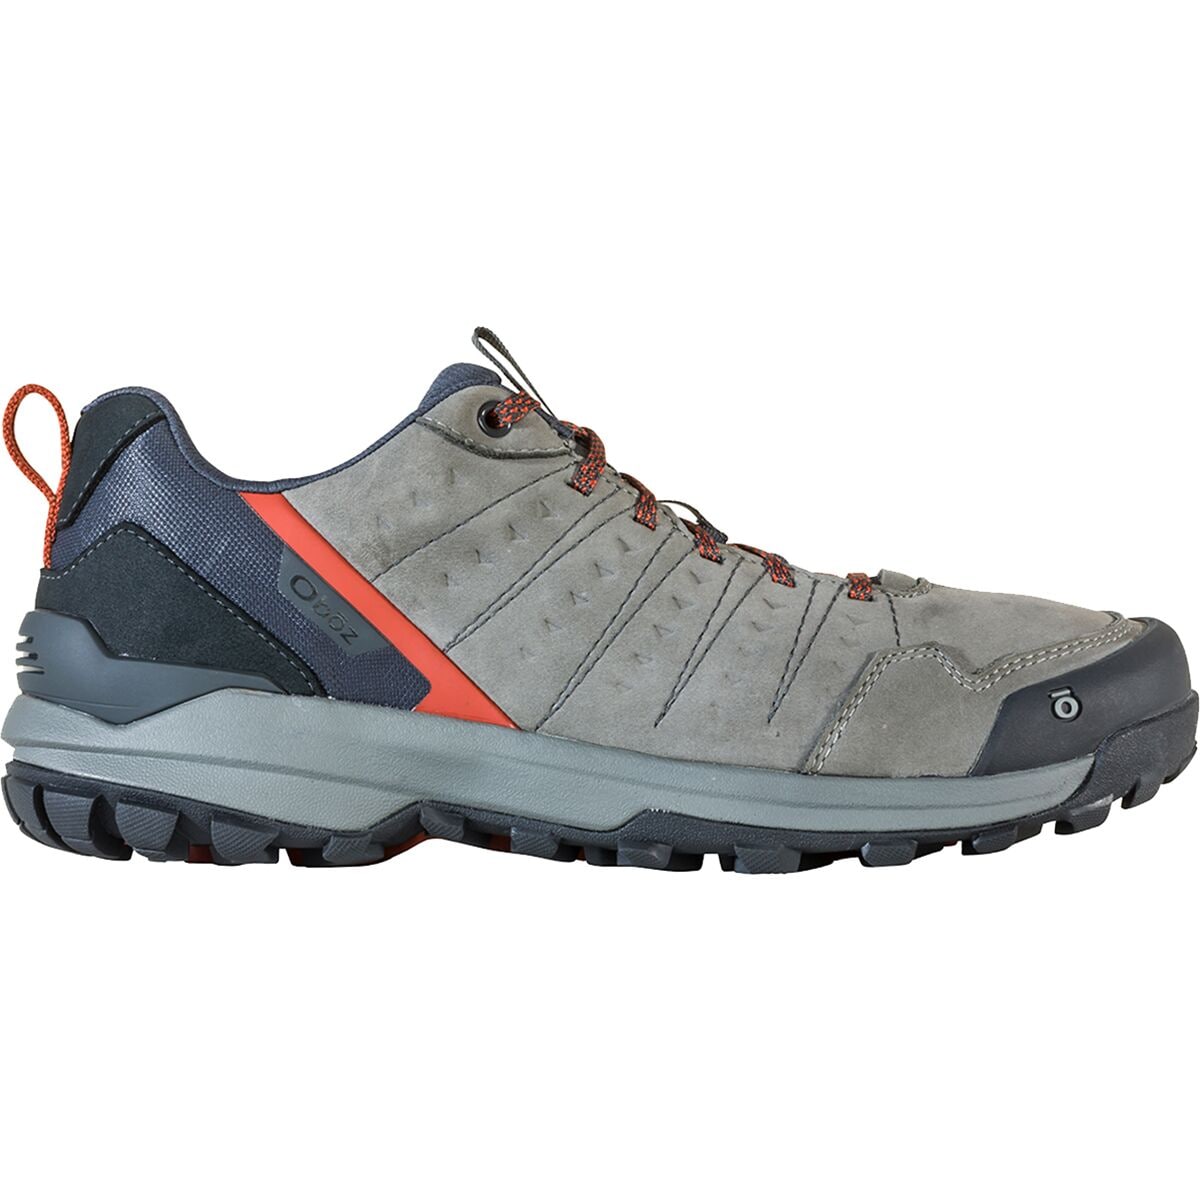 Sypes Low Leather B-DRY Wide Hiking Shoe - Men